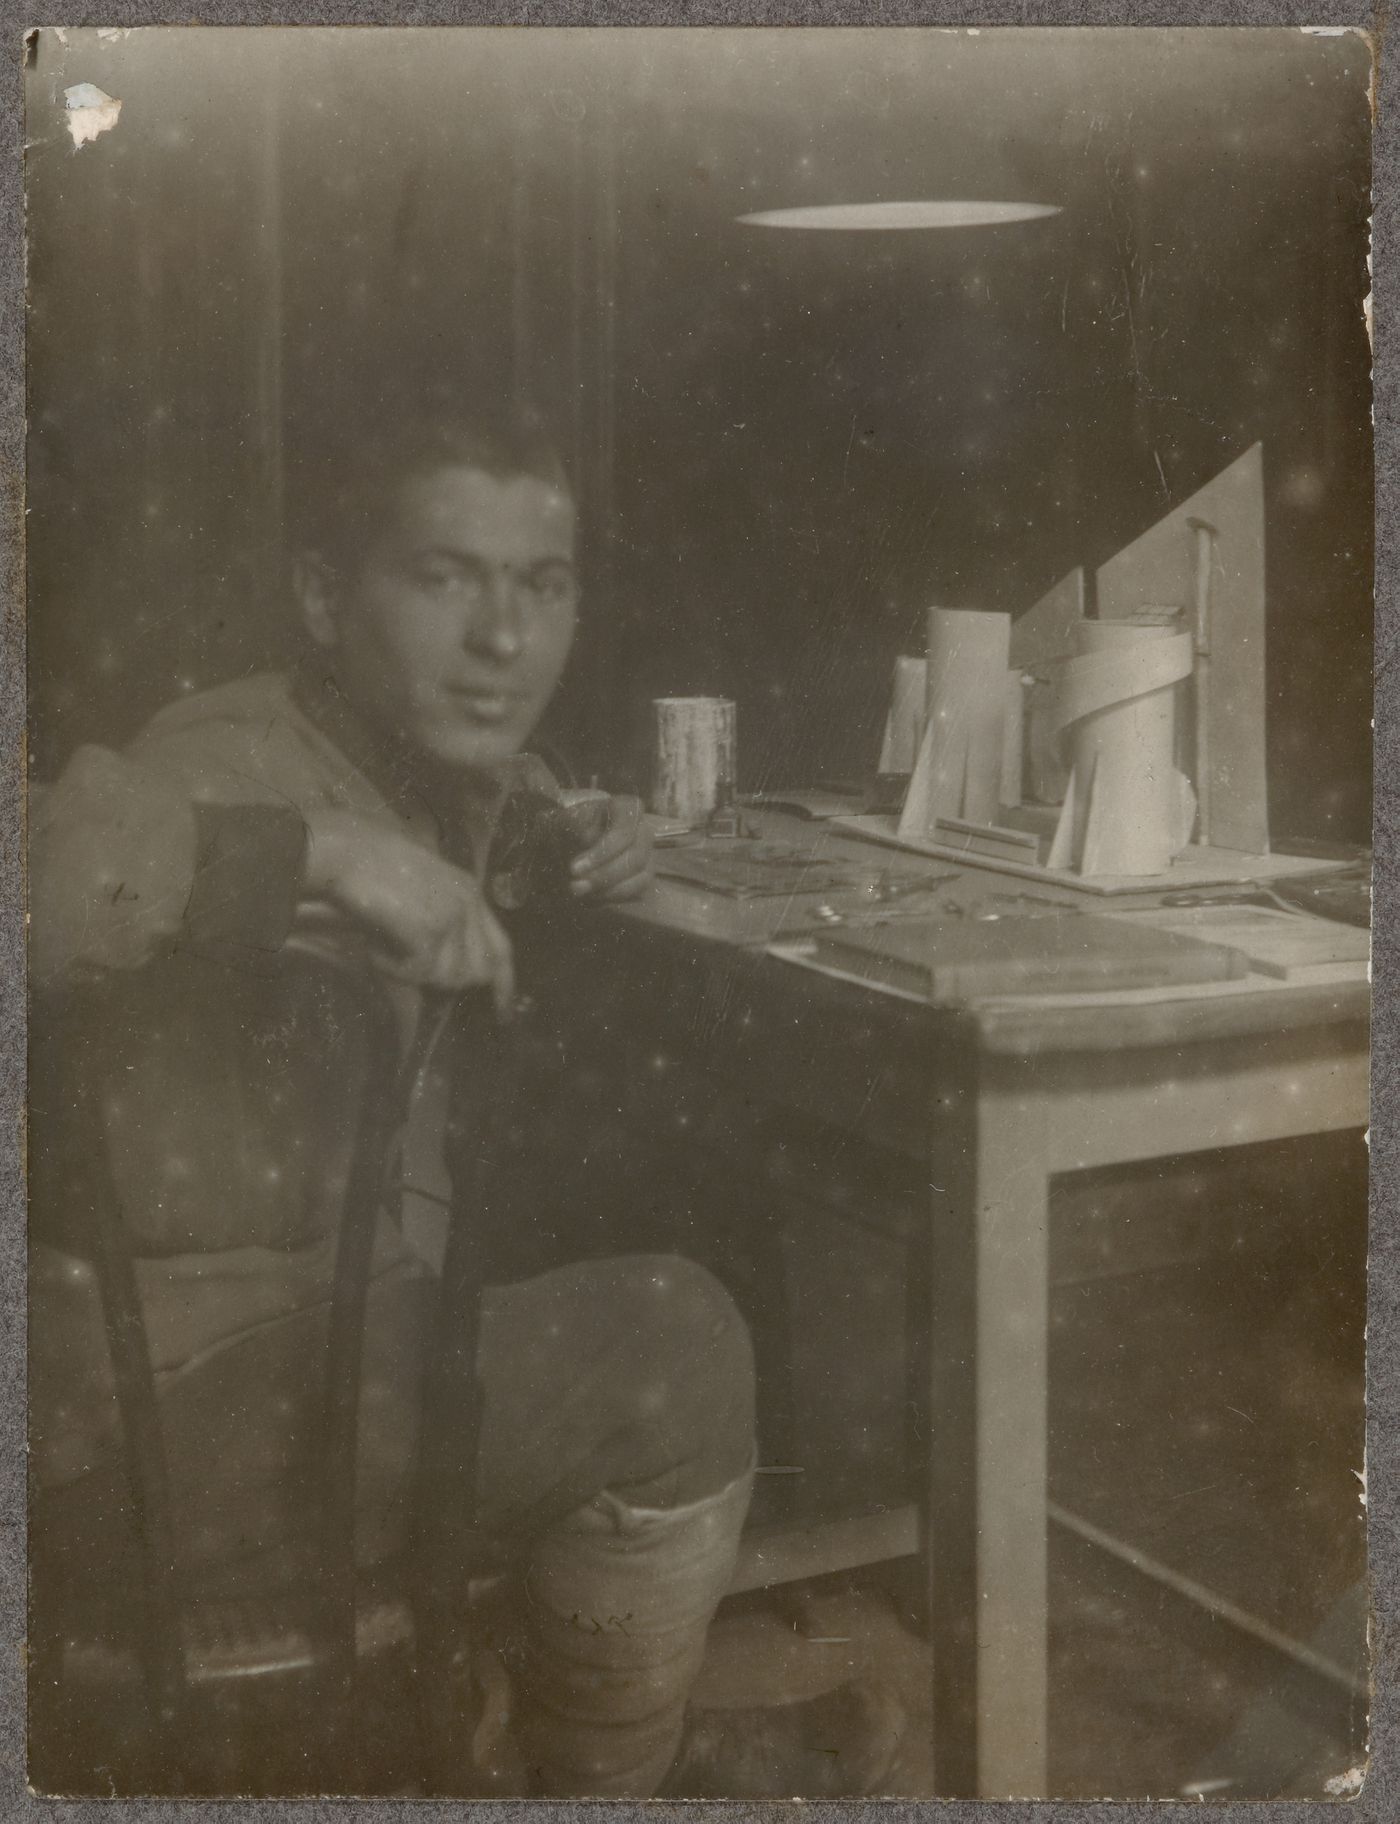 Portrait of an unidentified student at the Vkhutemas (Higher State Artistic Technical Studios), Moscow